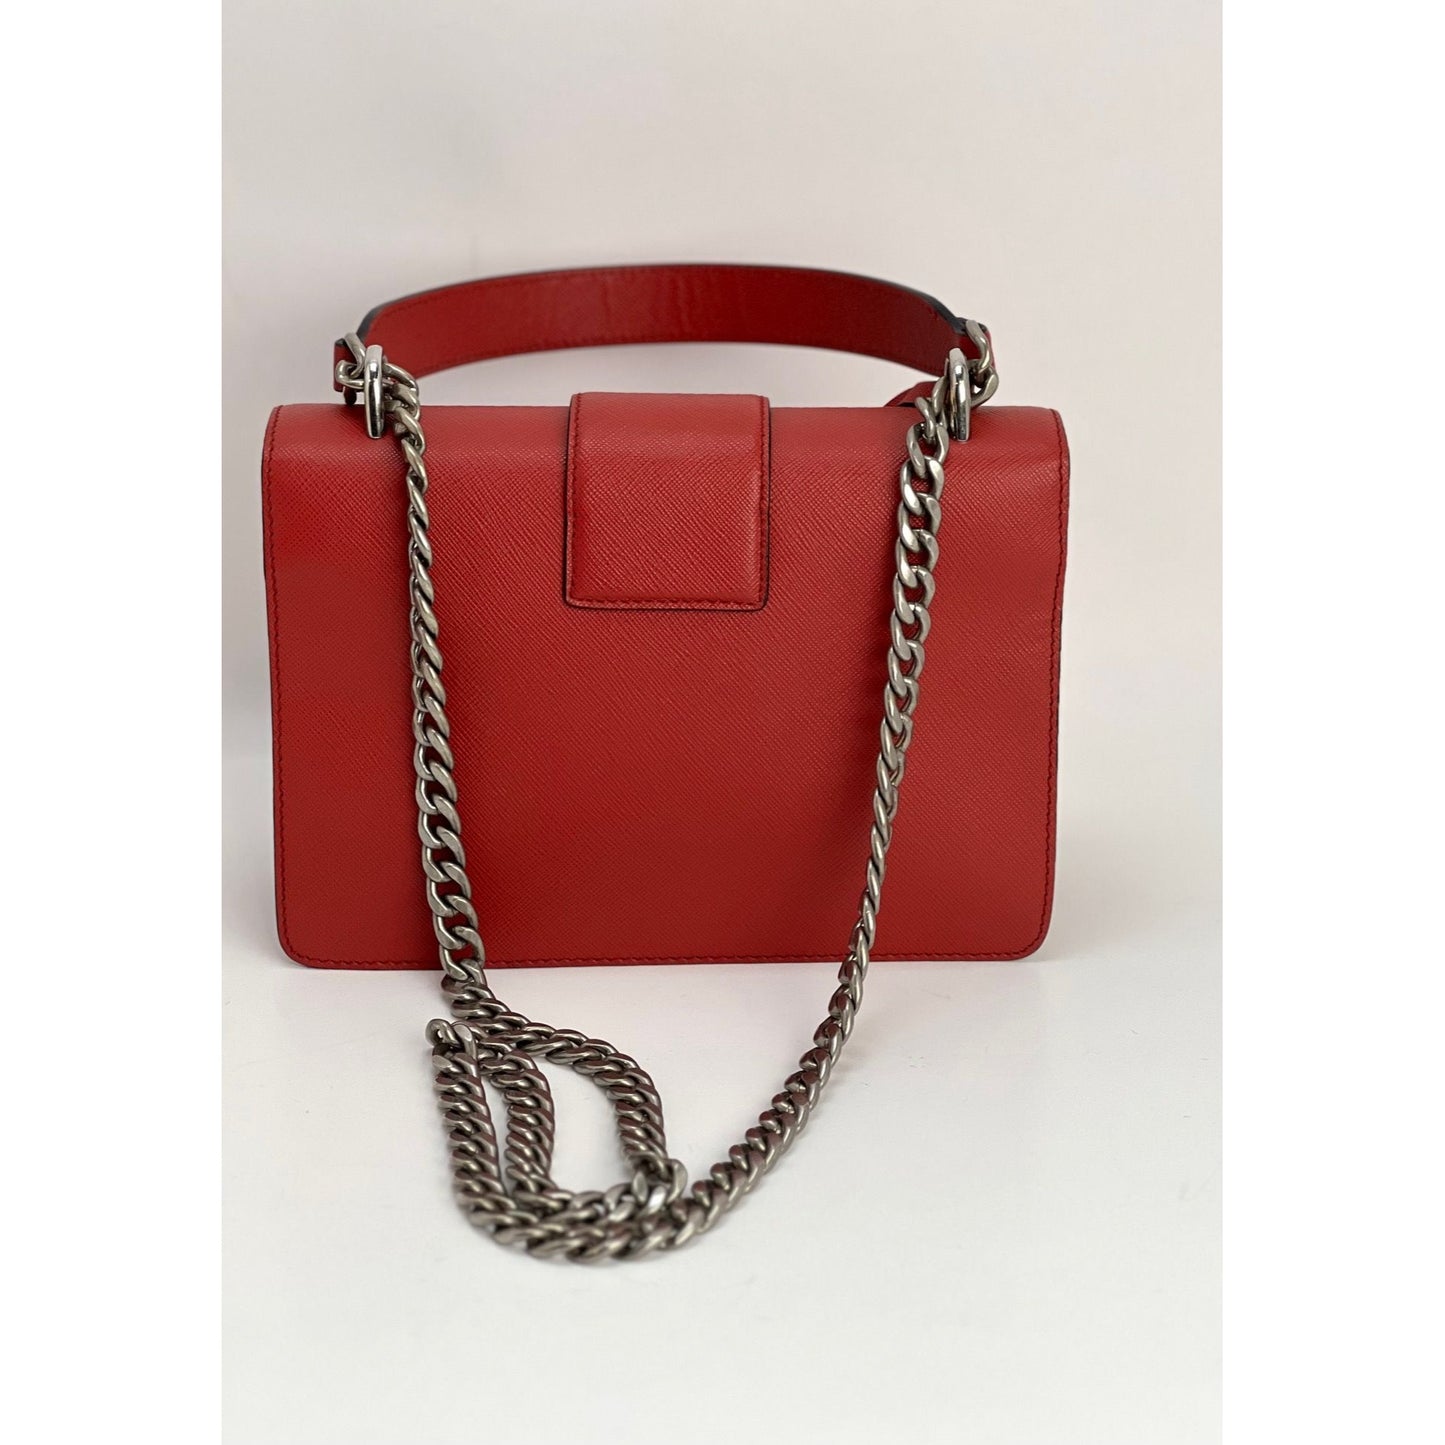 Outfit ideas - How to wear Prada Saffiano Small Double-Handle Tote Bag, Red  (Fuoco) - WEAR